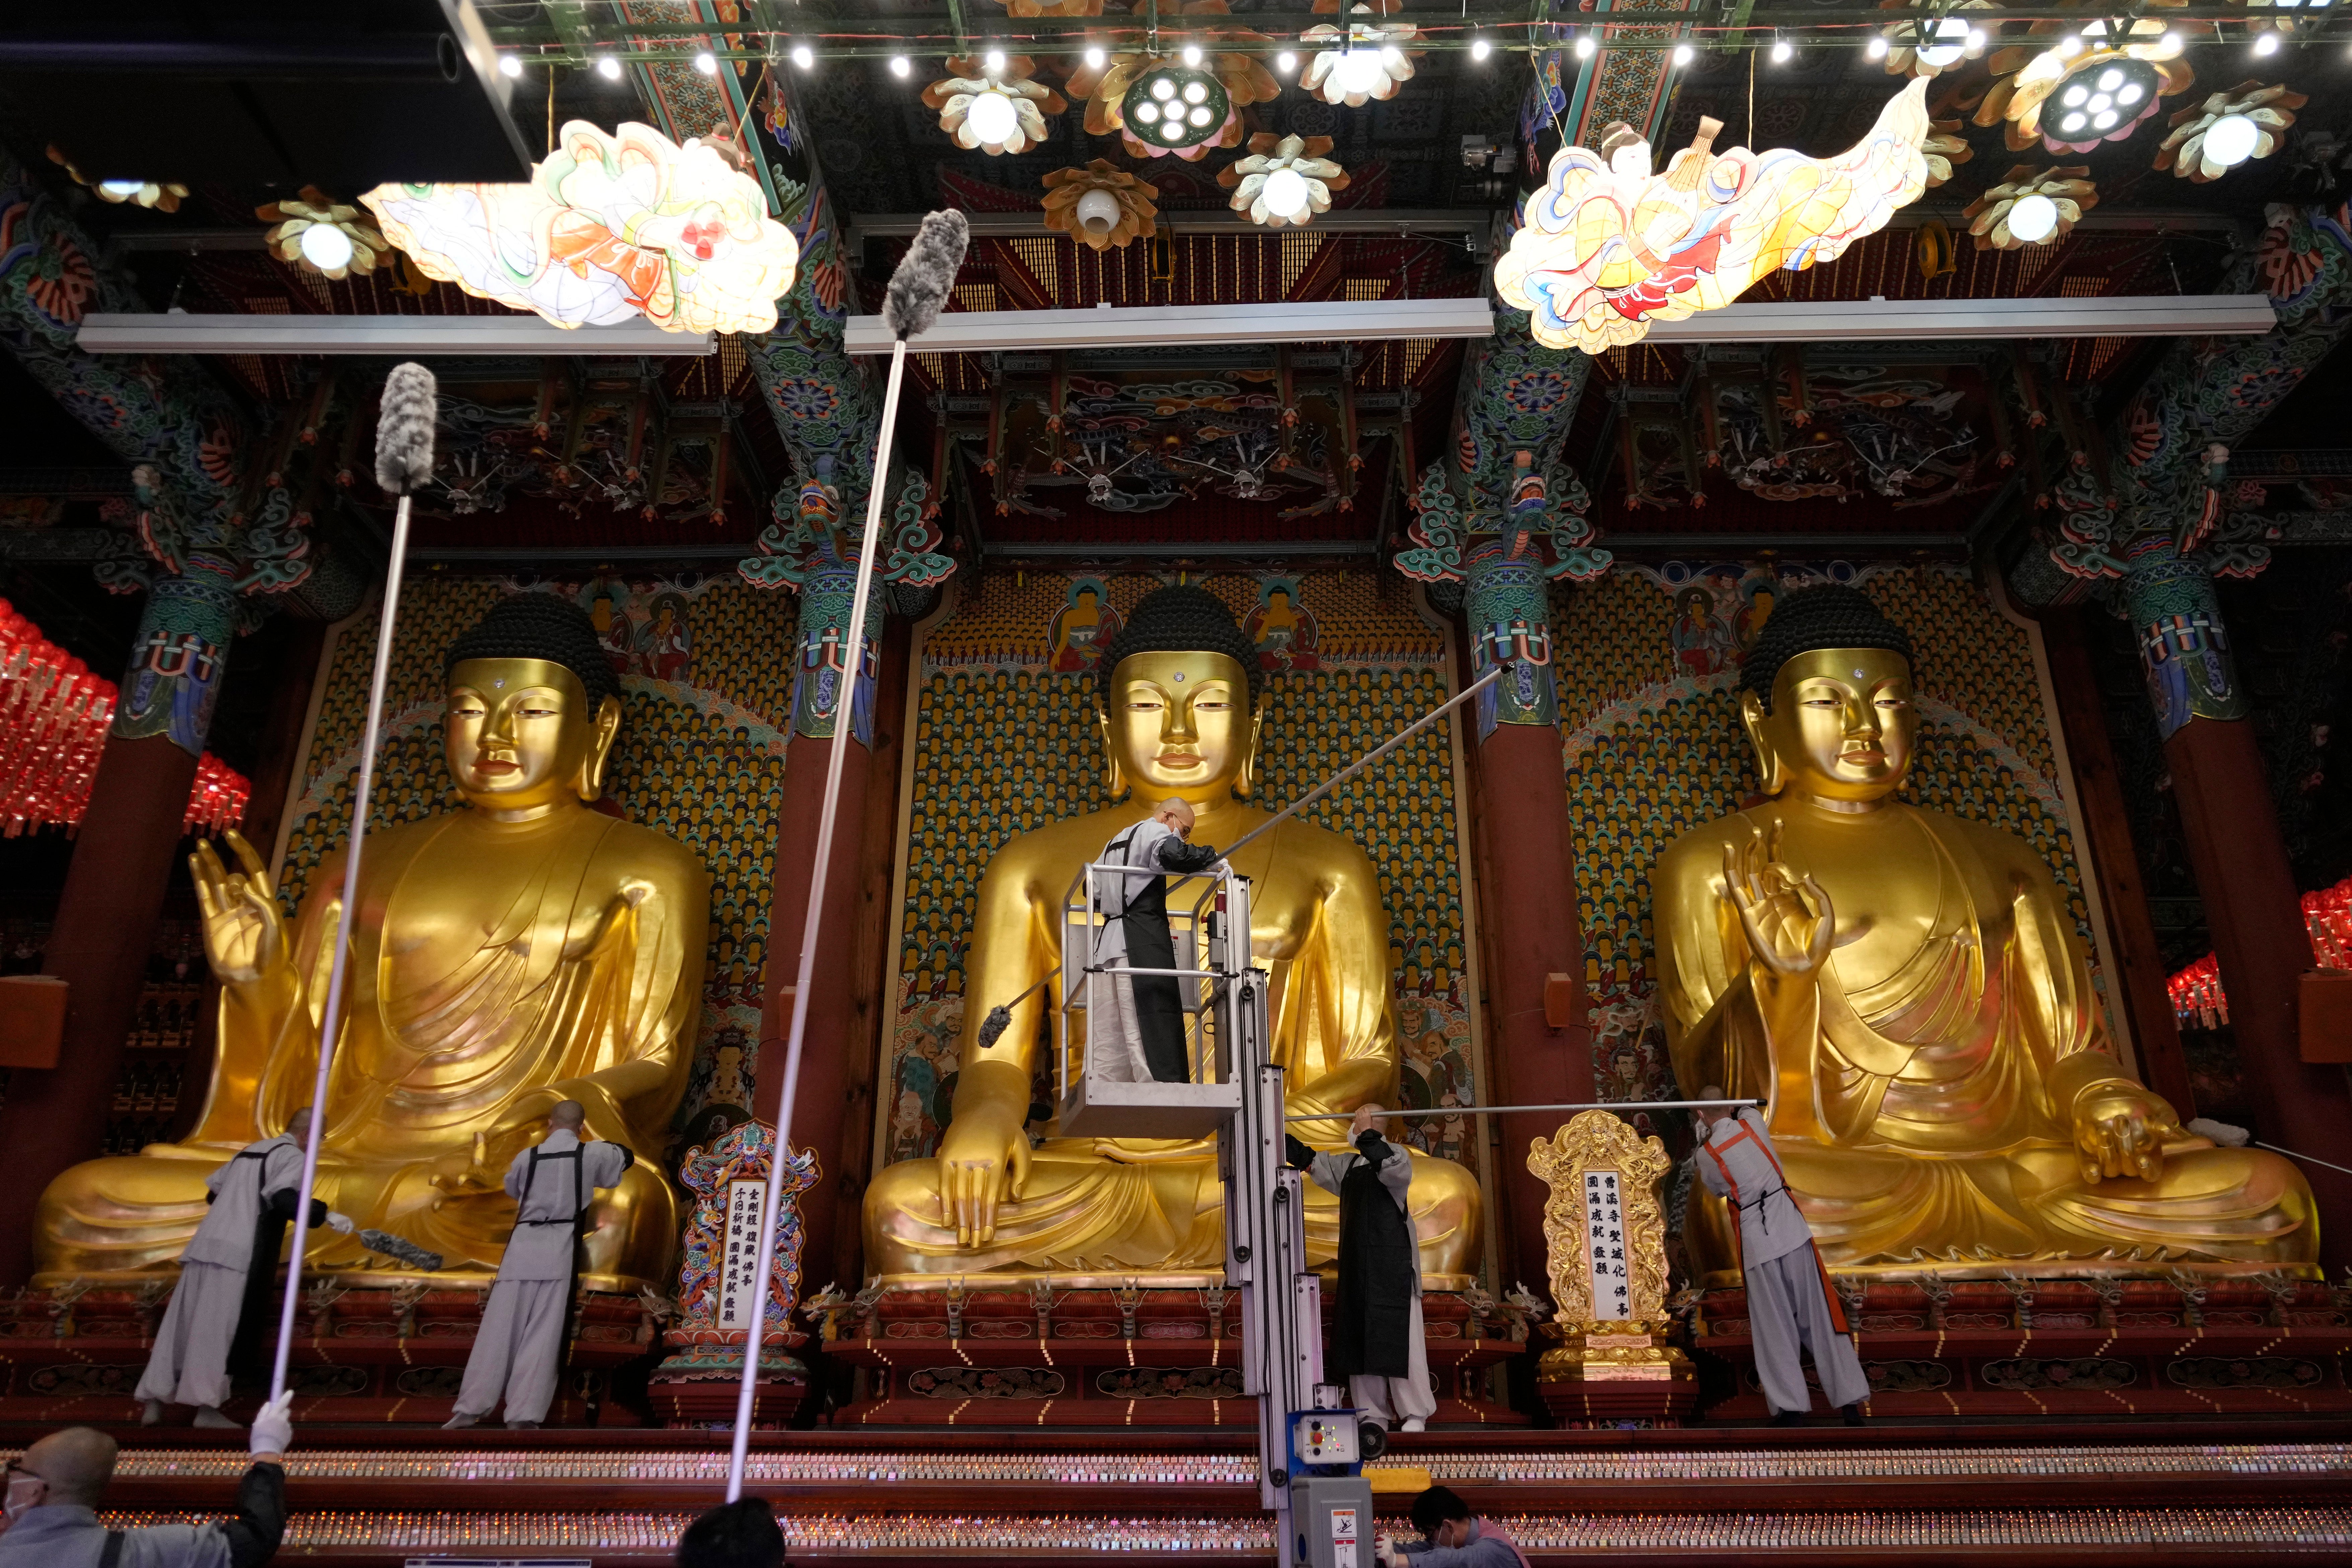 Buddhists monks clean Buddha statues ahead of the upcoming birthday of Buddha on May 15, at the Jogye temple in Seoul